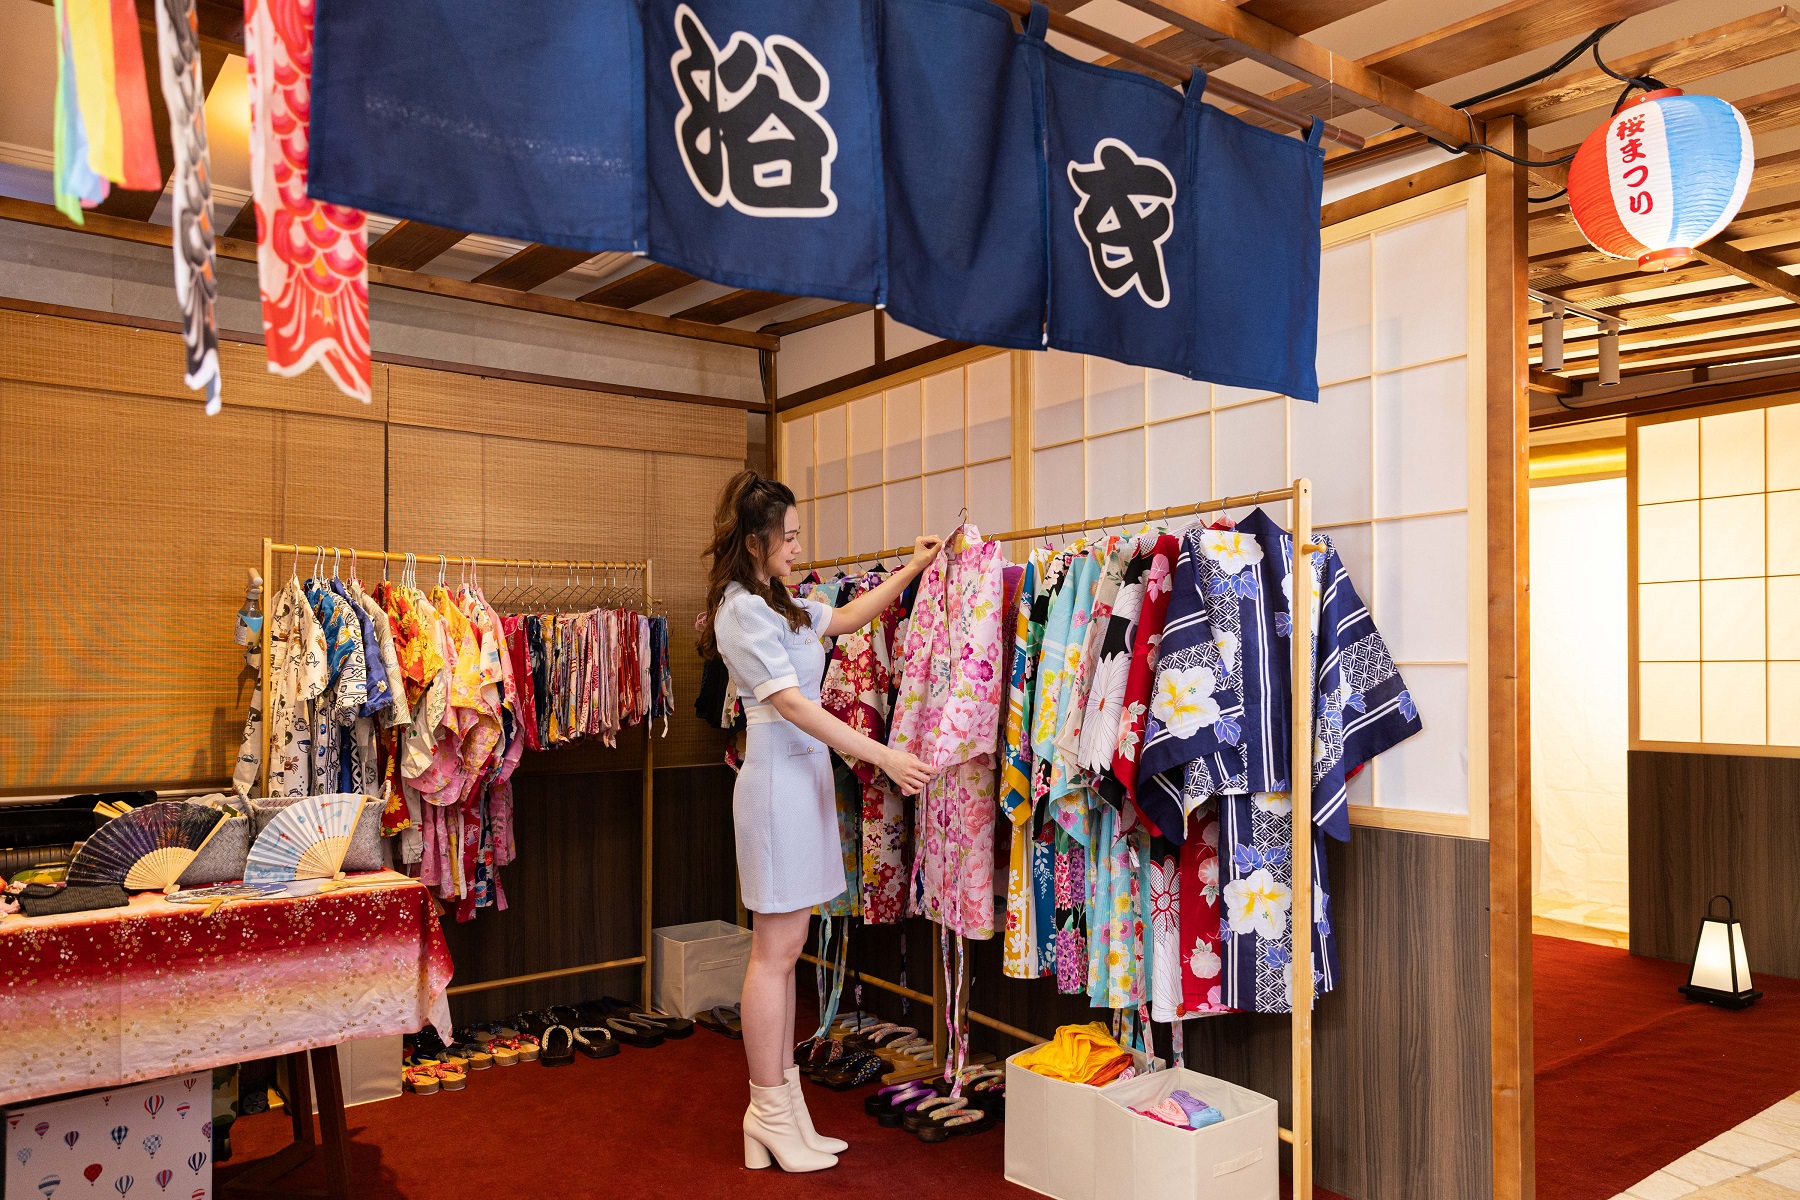 Over the Sakura Cultural Festival, guests can enjoy Japanese yukata experience by presenting spending receipts in designated amount.